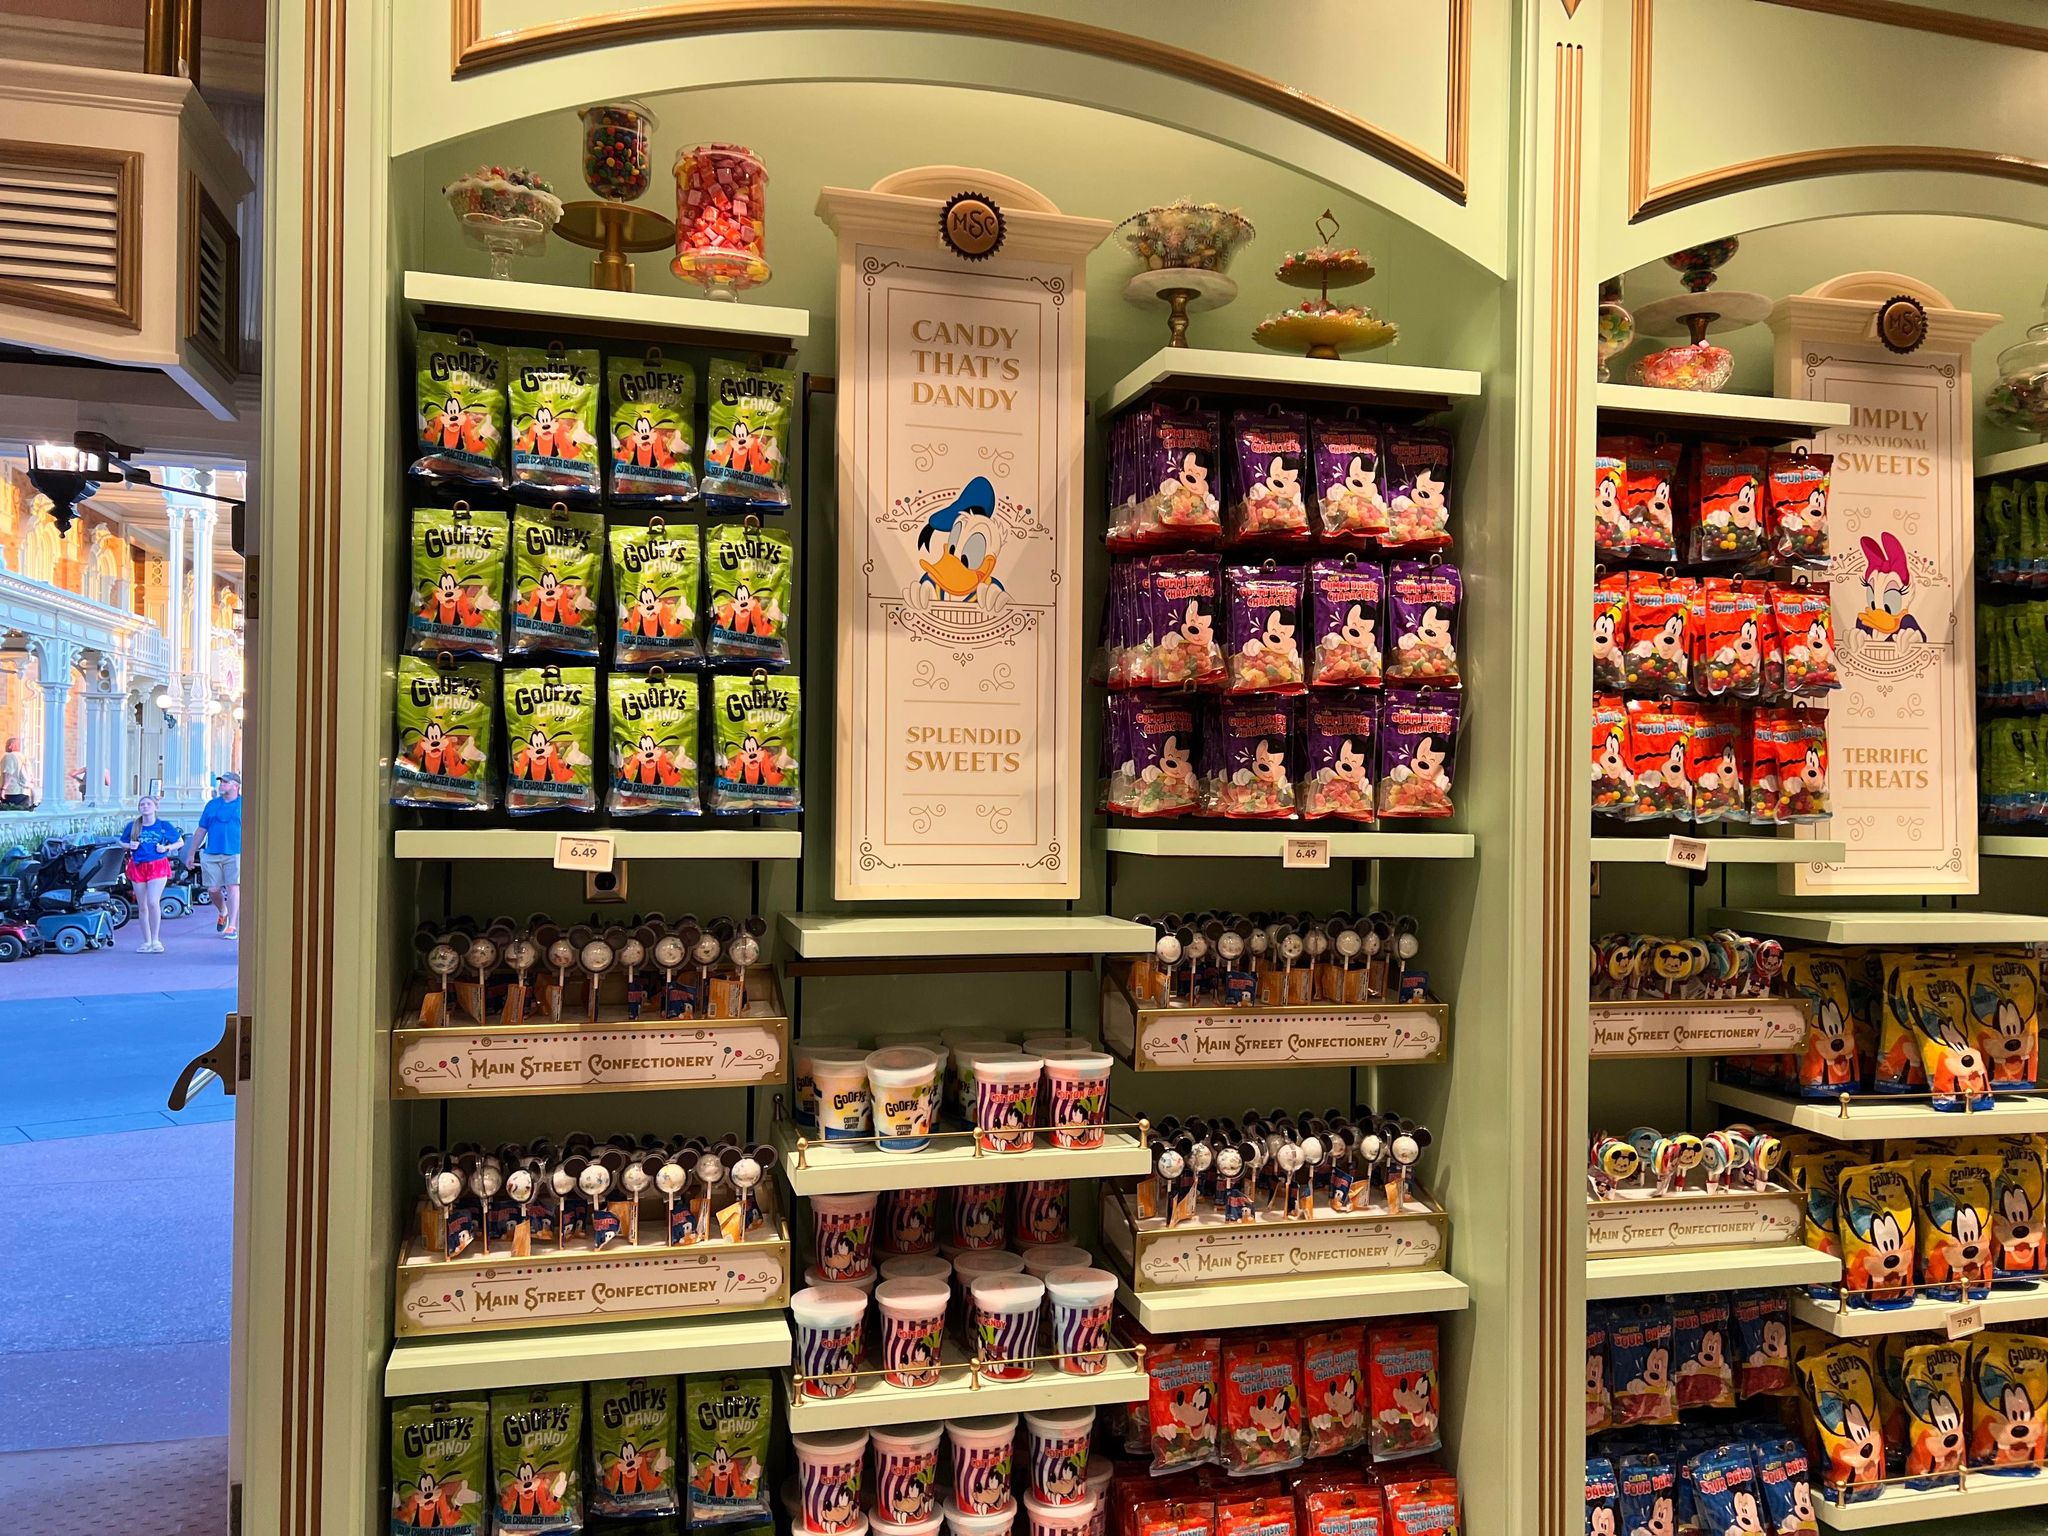 See What's Cooking In the Beautifully Remodeled Main Street Confectionary Magic Kingdom 1